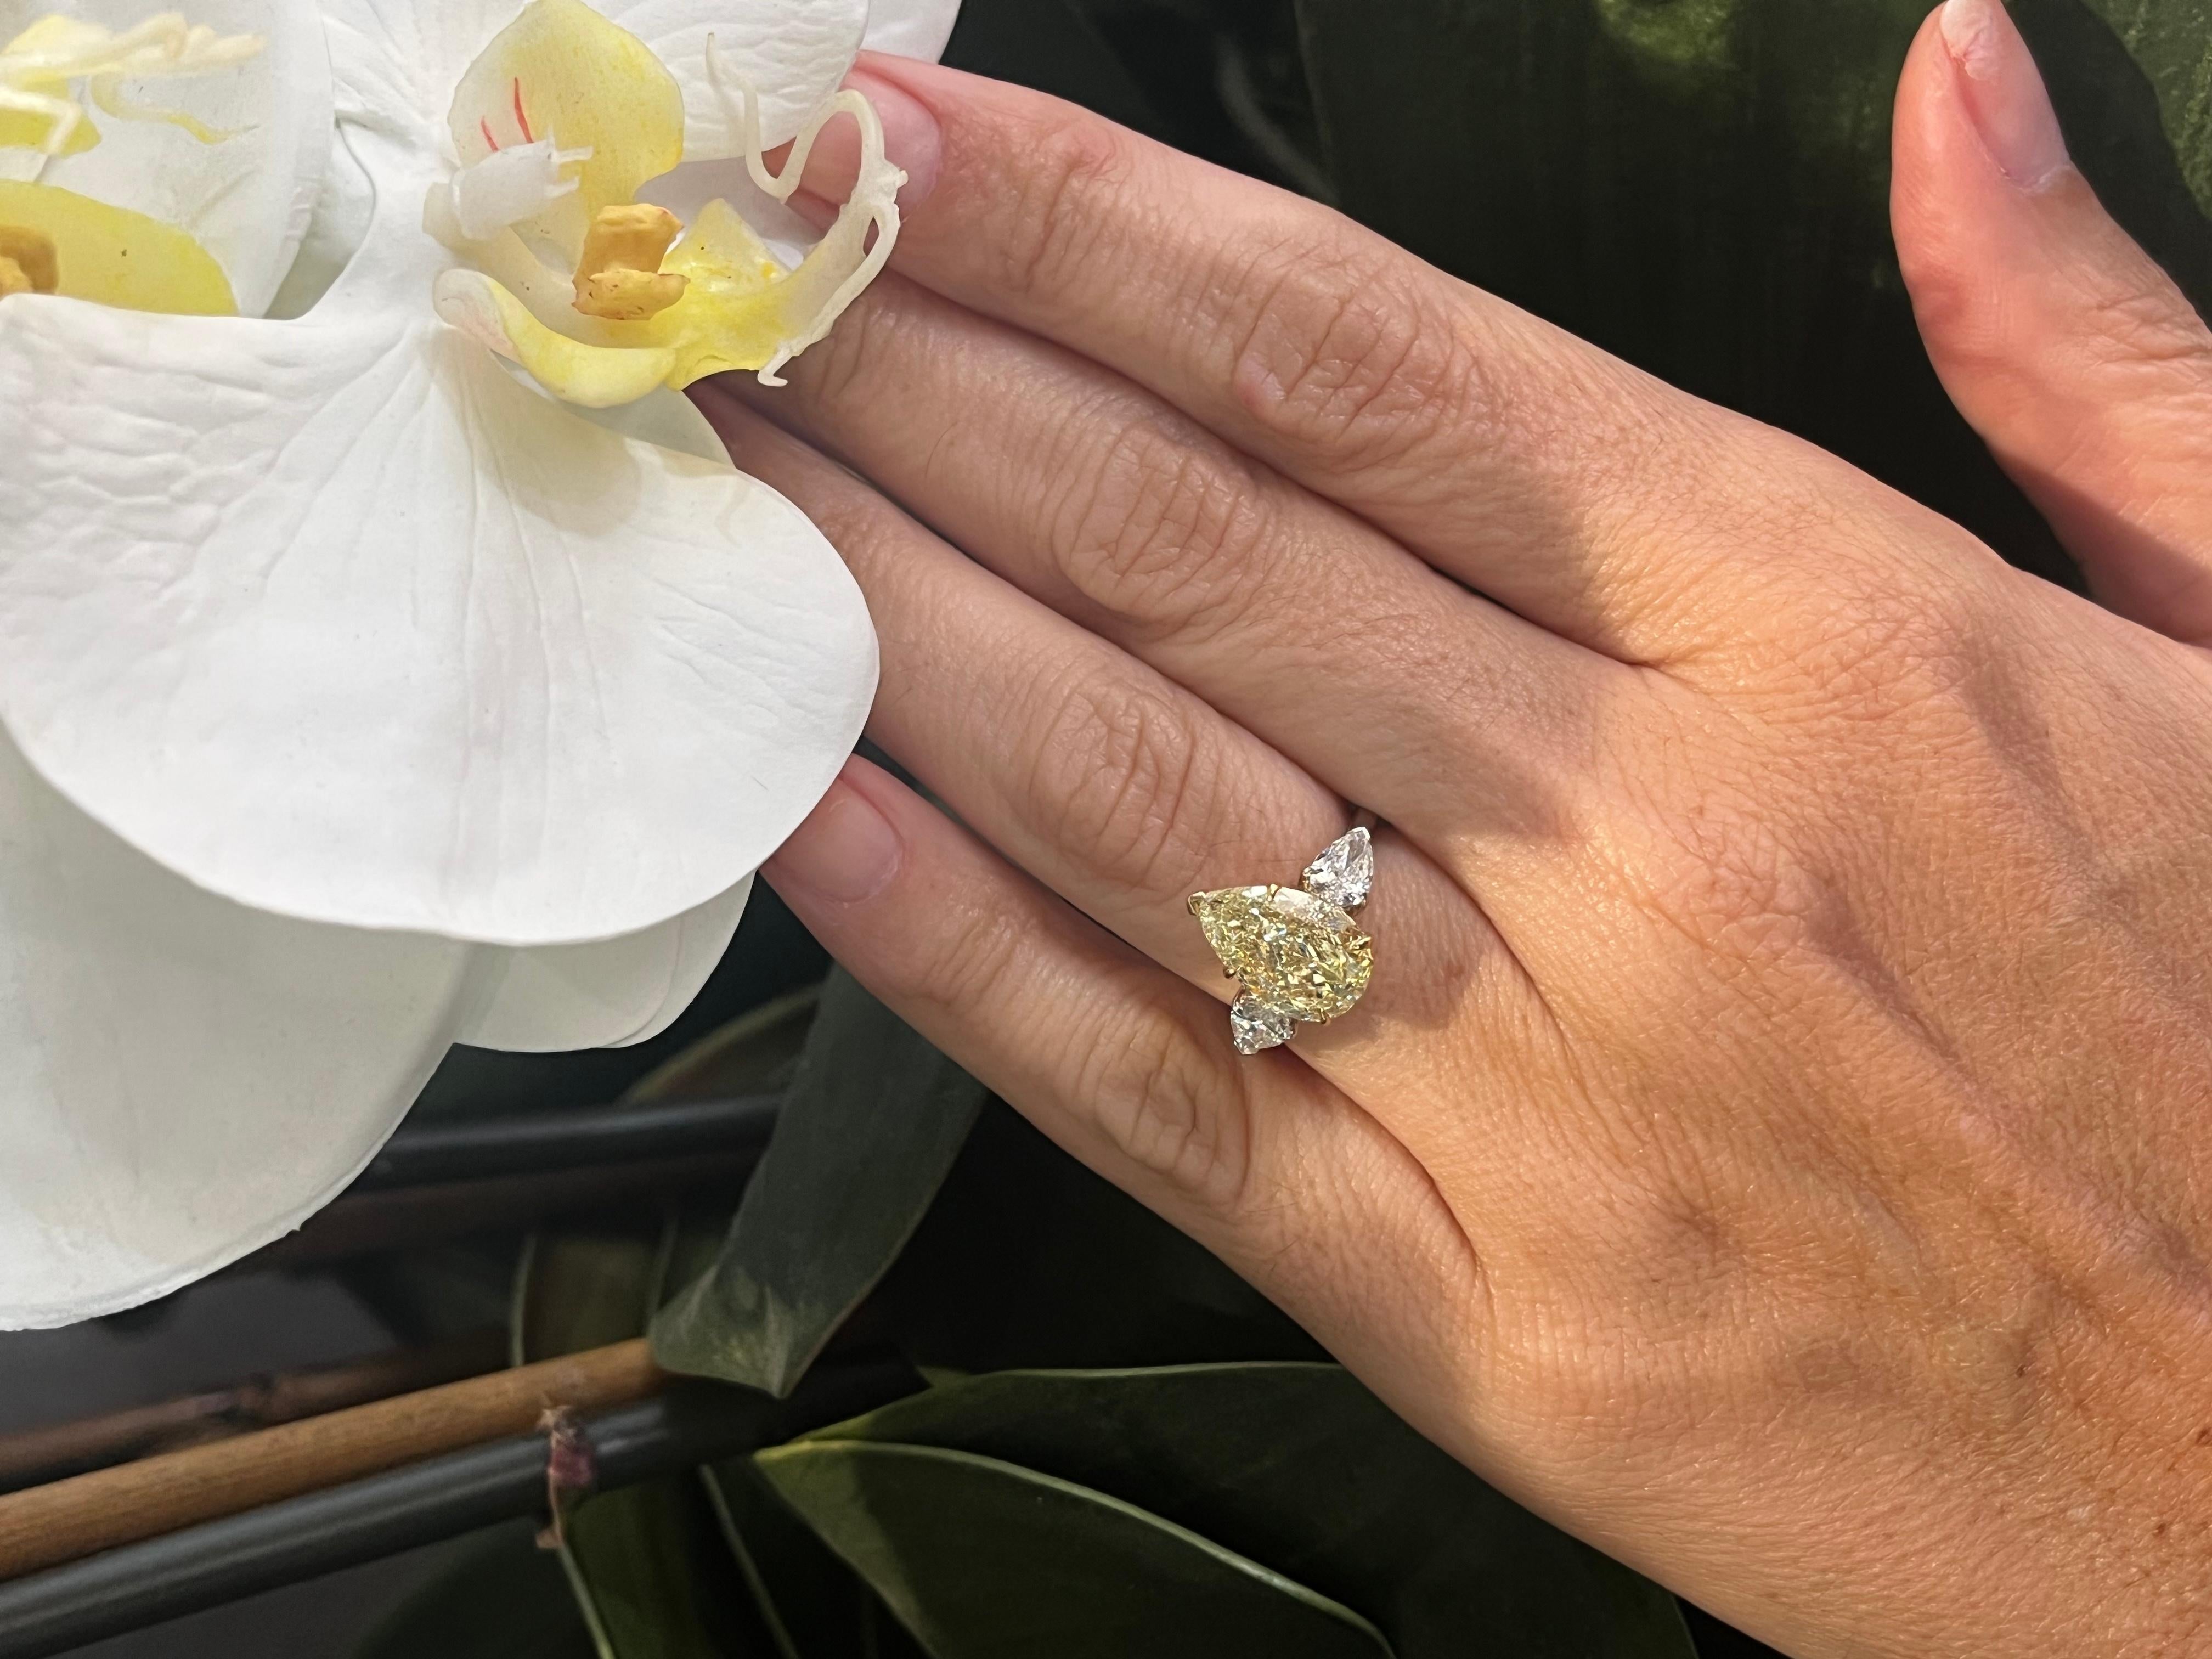 GIA 4.01cts Yellow Diamond Engagement Ring set in Platinum 950 and 18K Gold For Sale 2